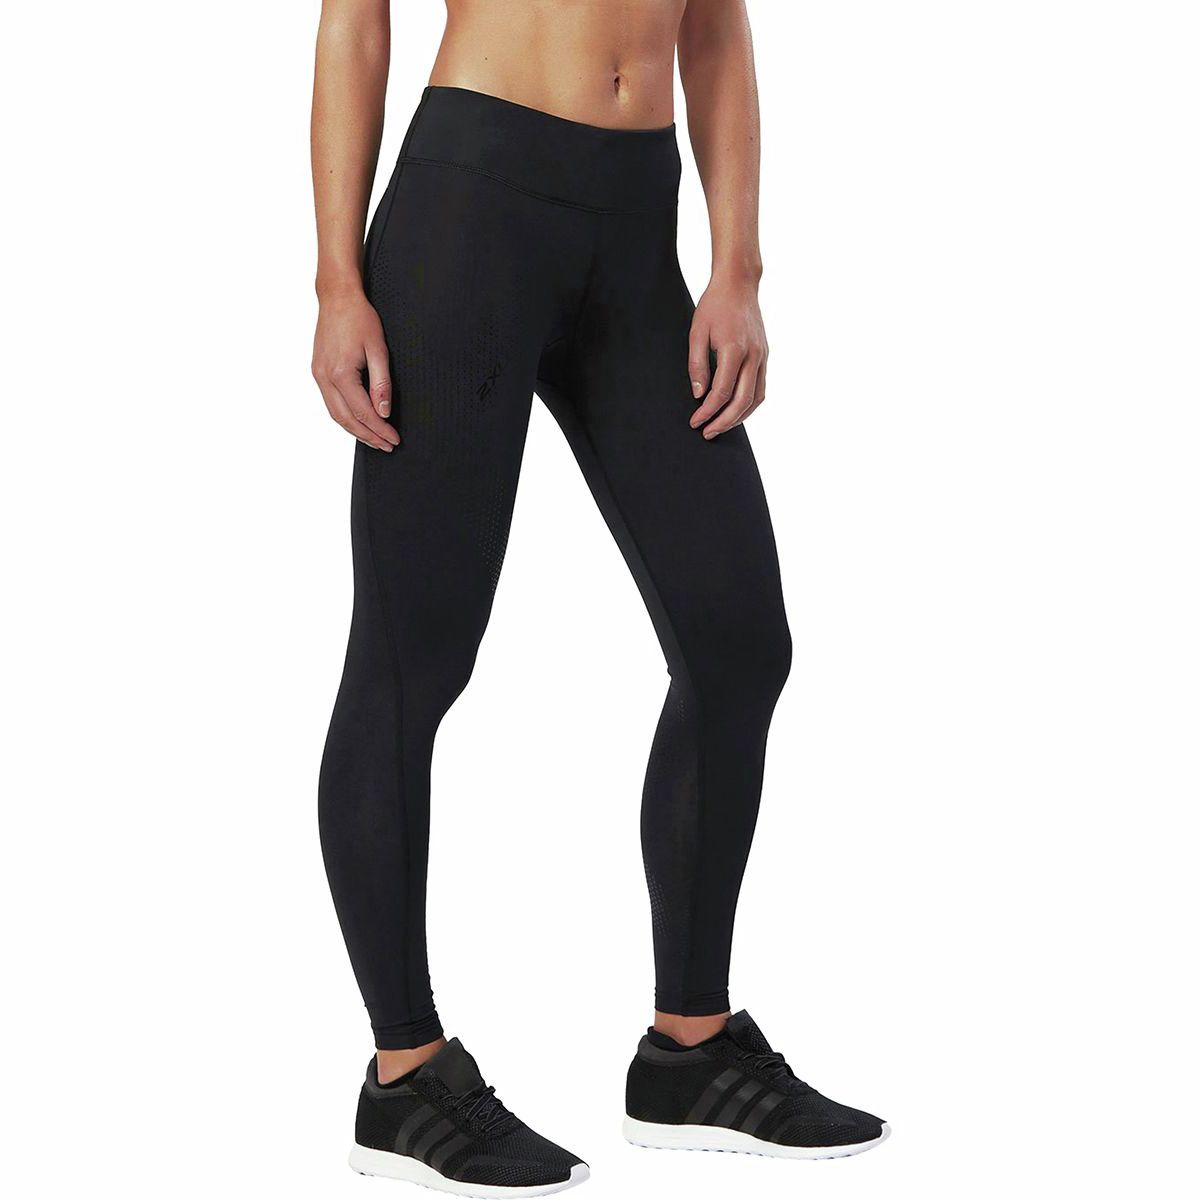 2XU Compression Tights Women's - Clothing